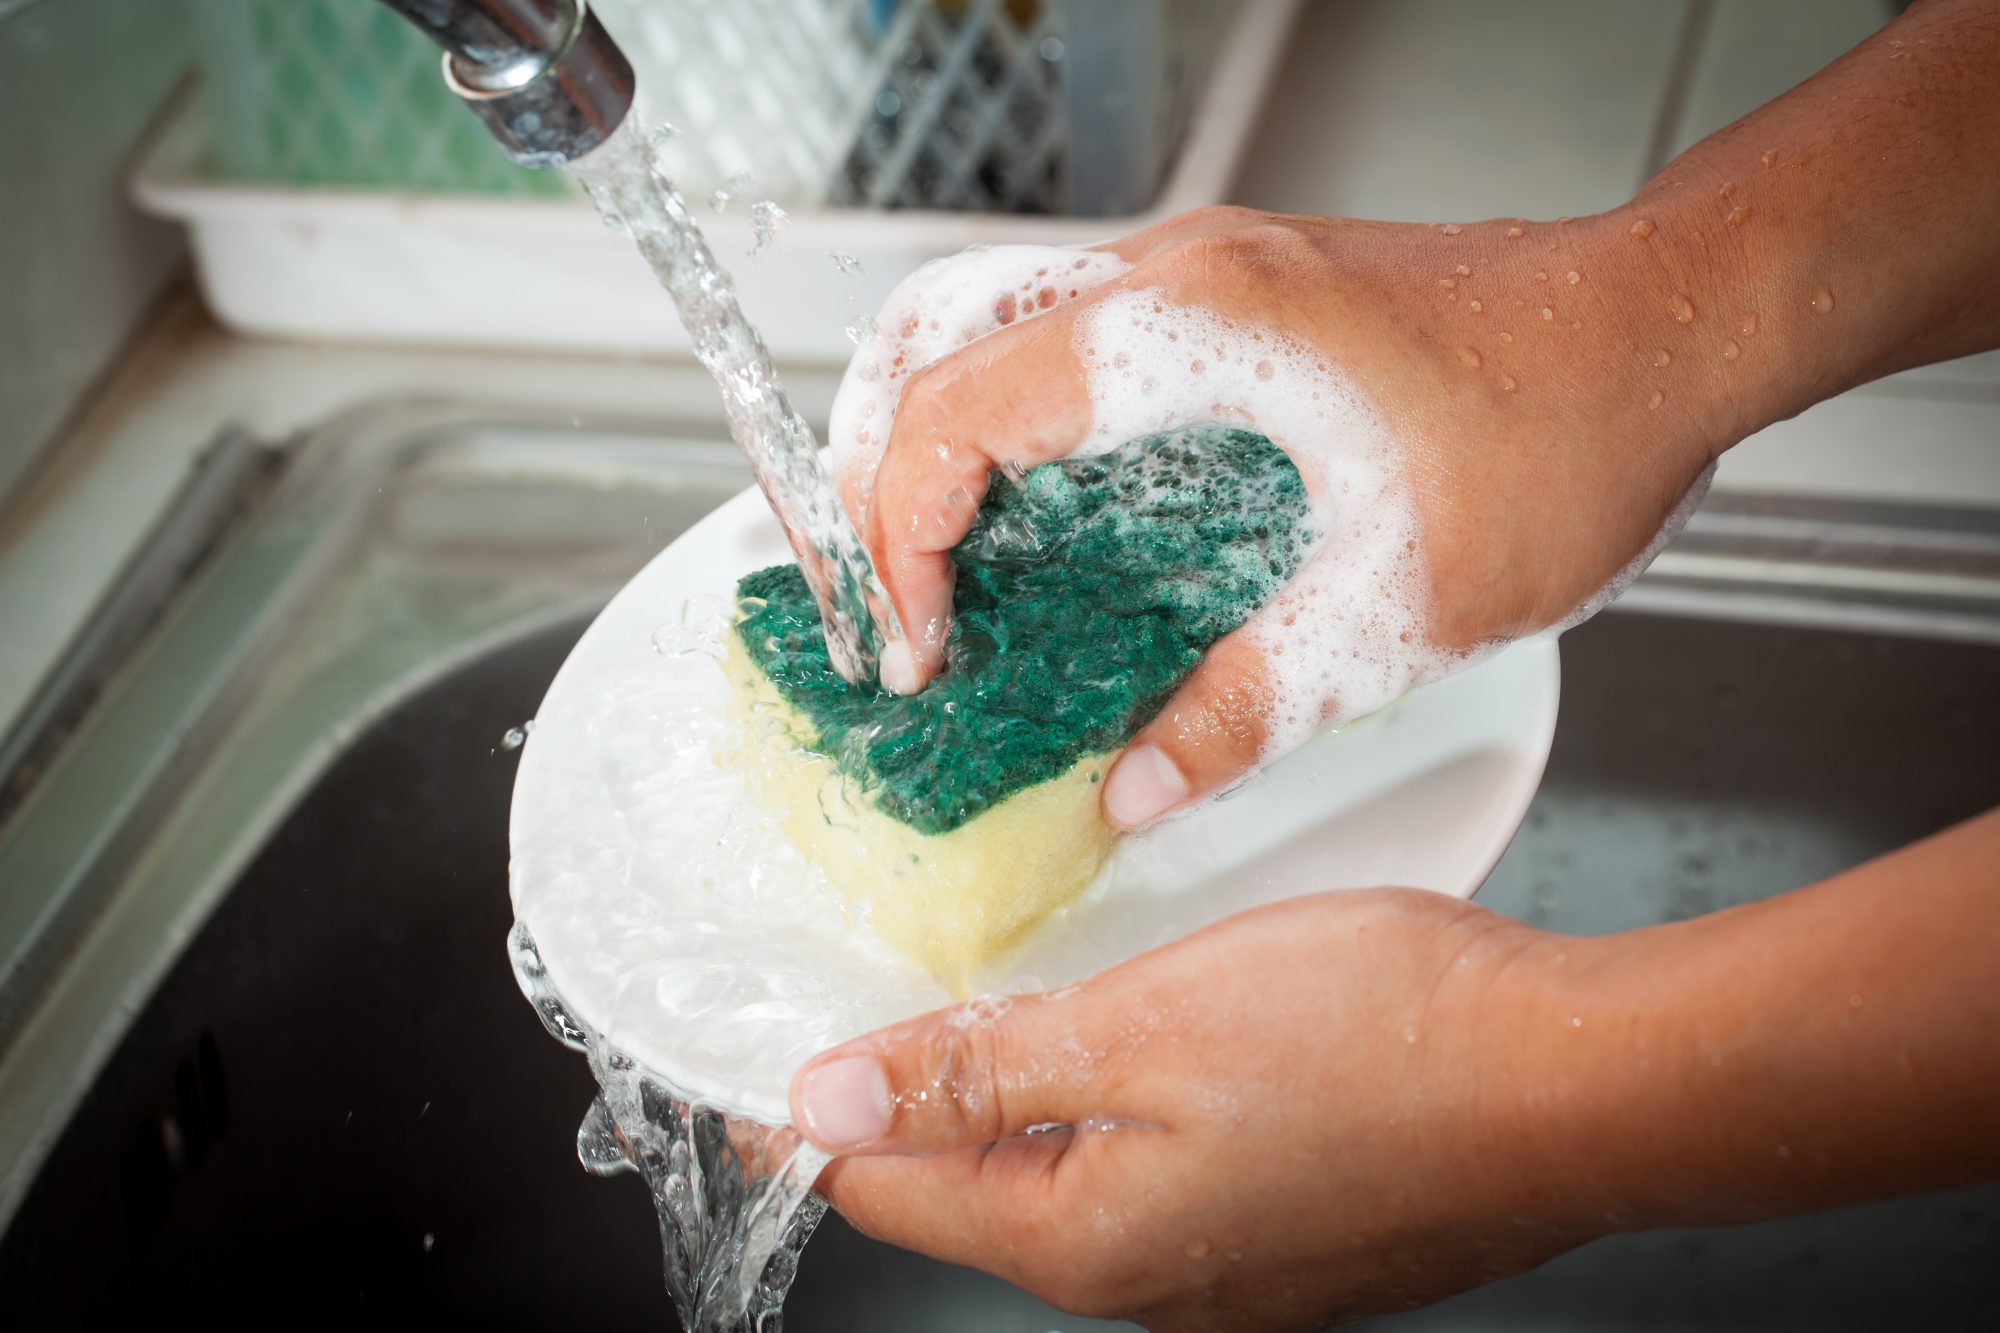 How to Deal With a Smelly Kitchen Sponge